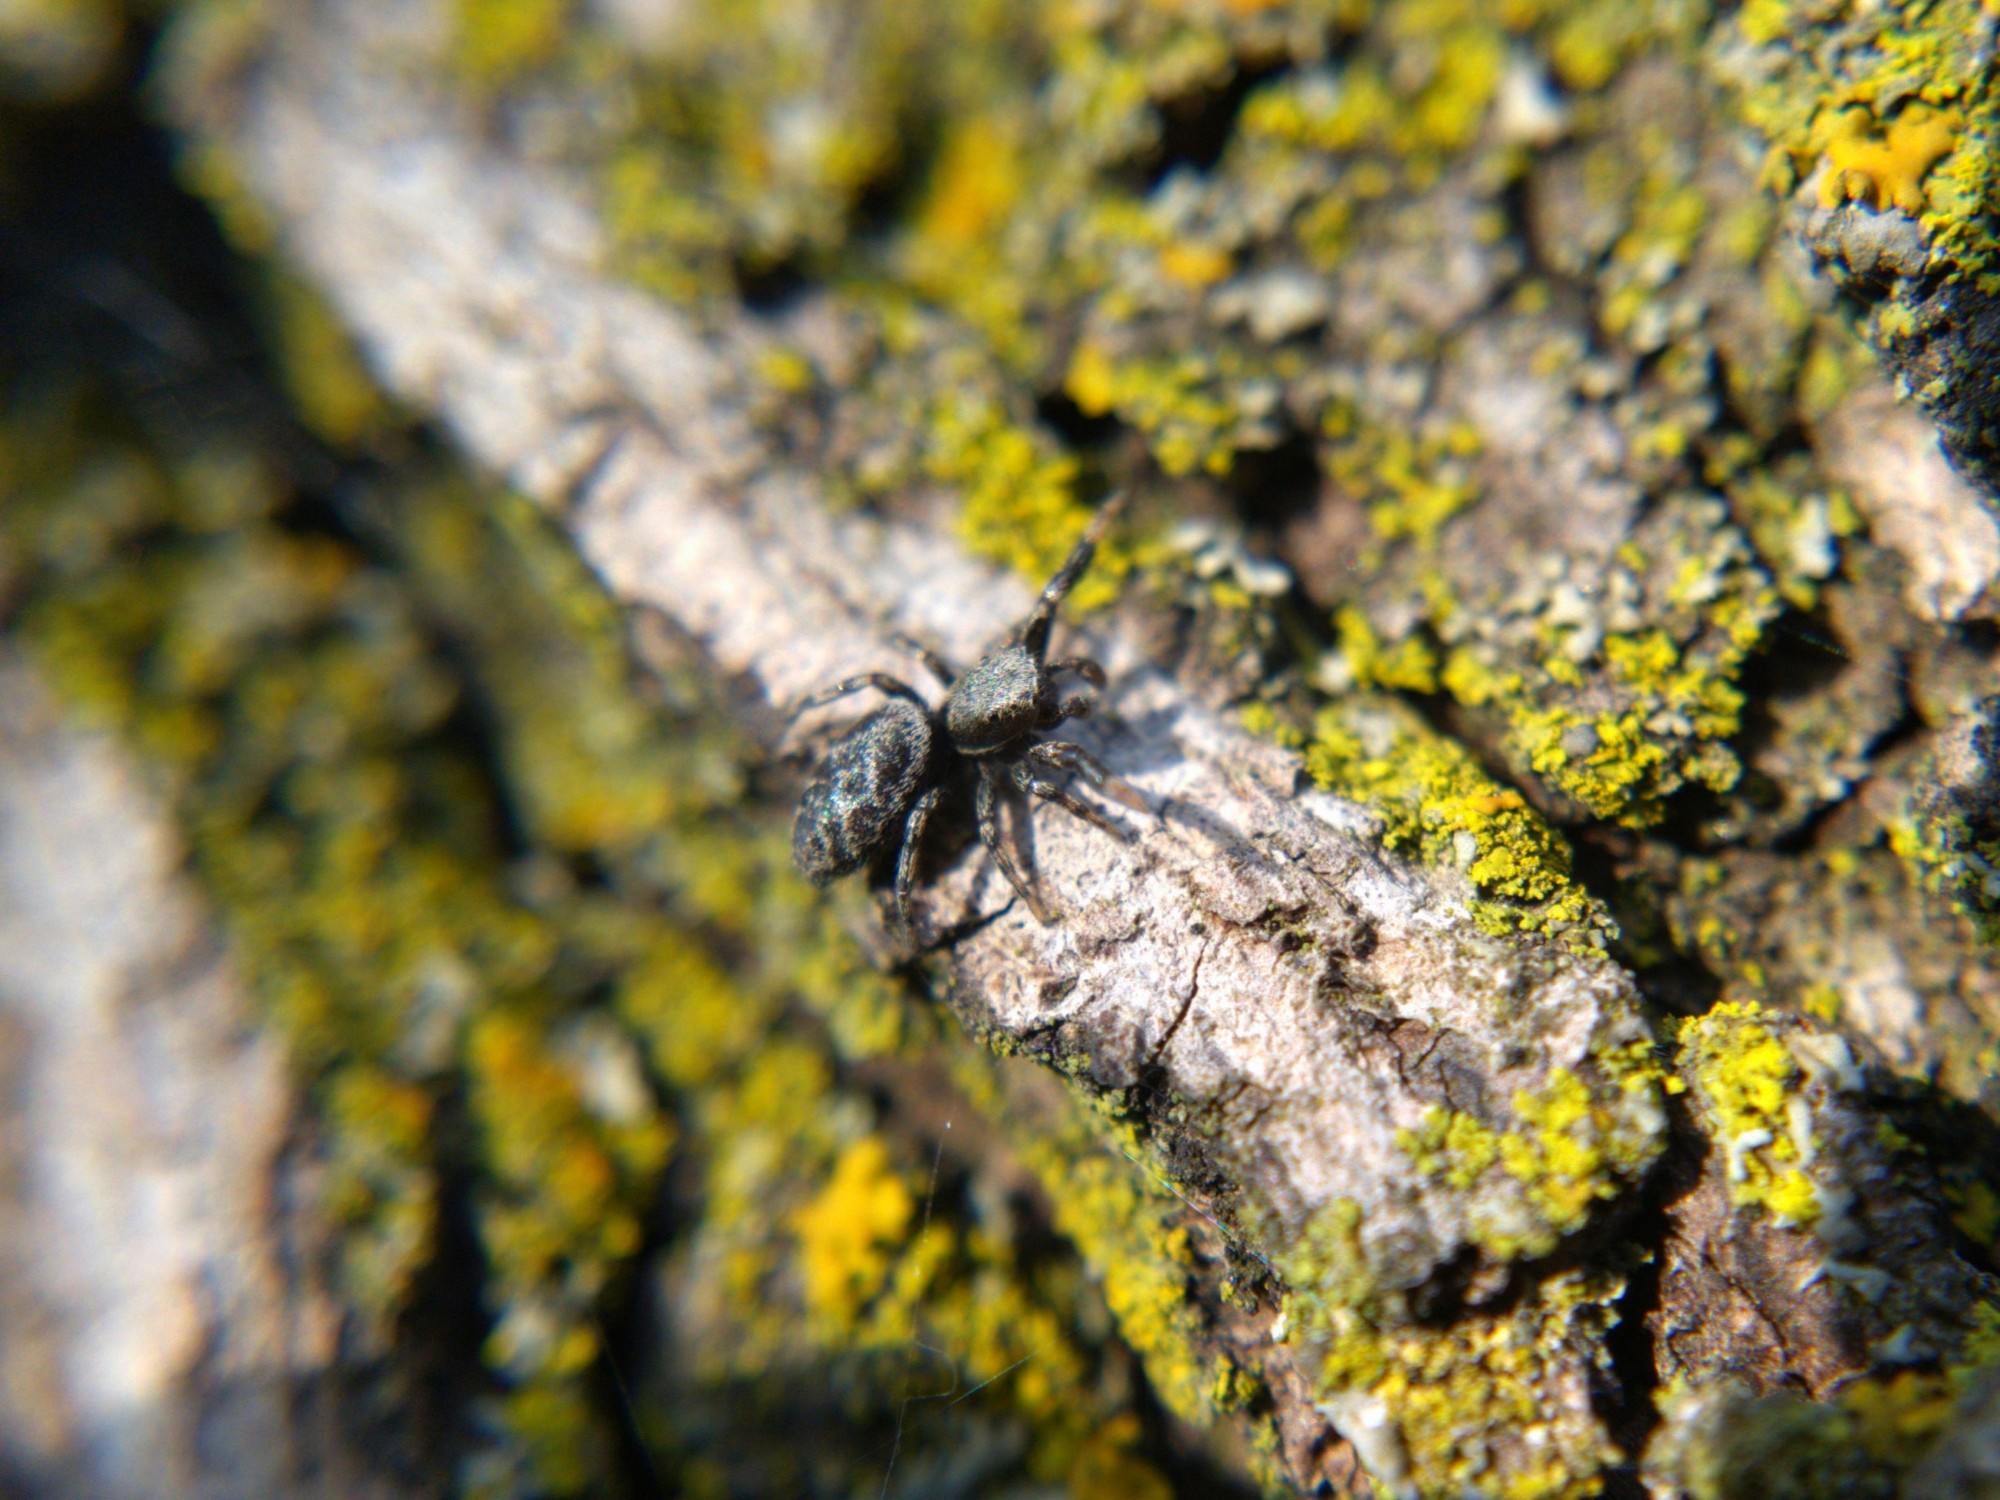 A Tutelina jumping spider on tree bark, stretching out its front legs.